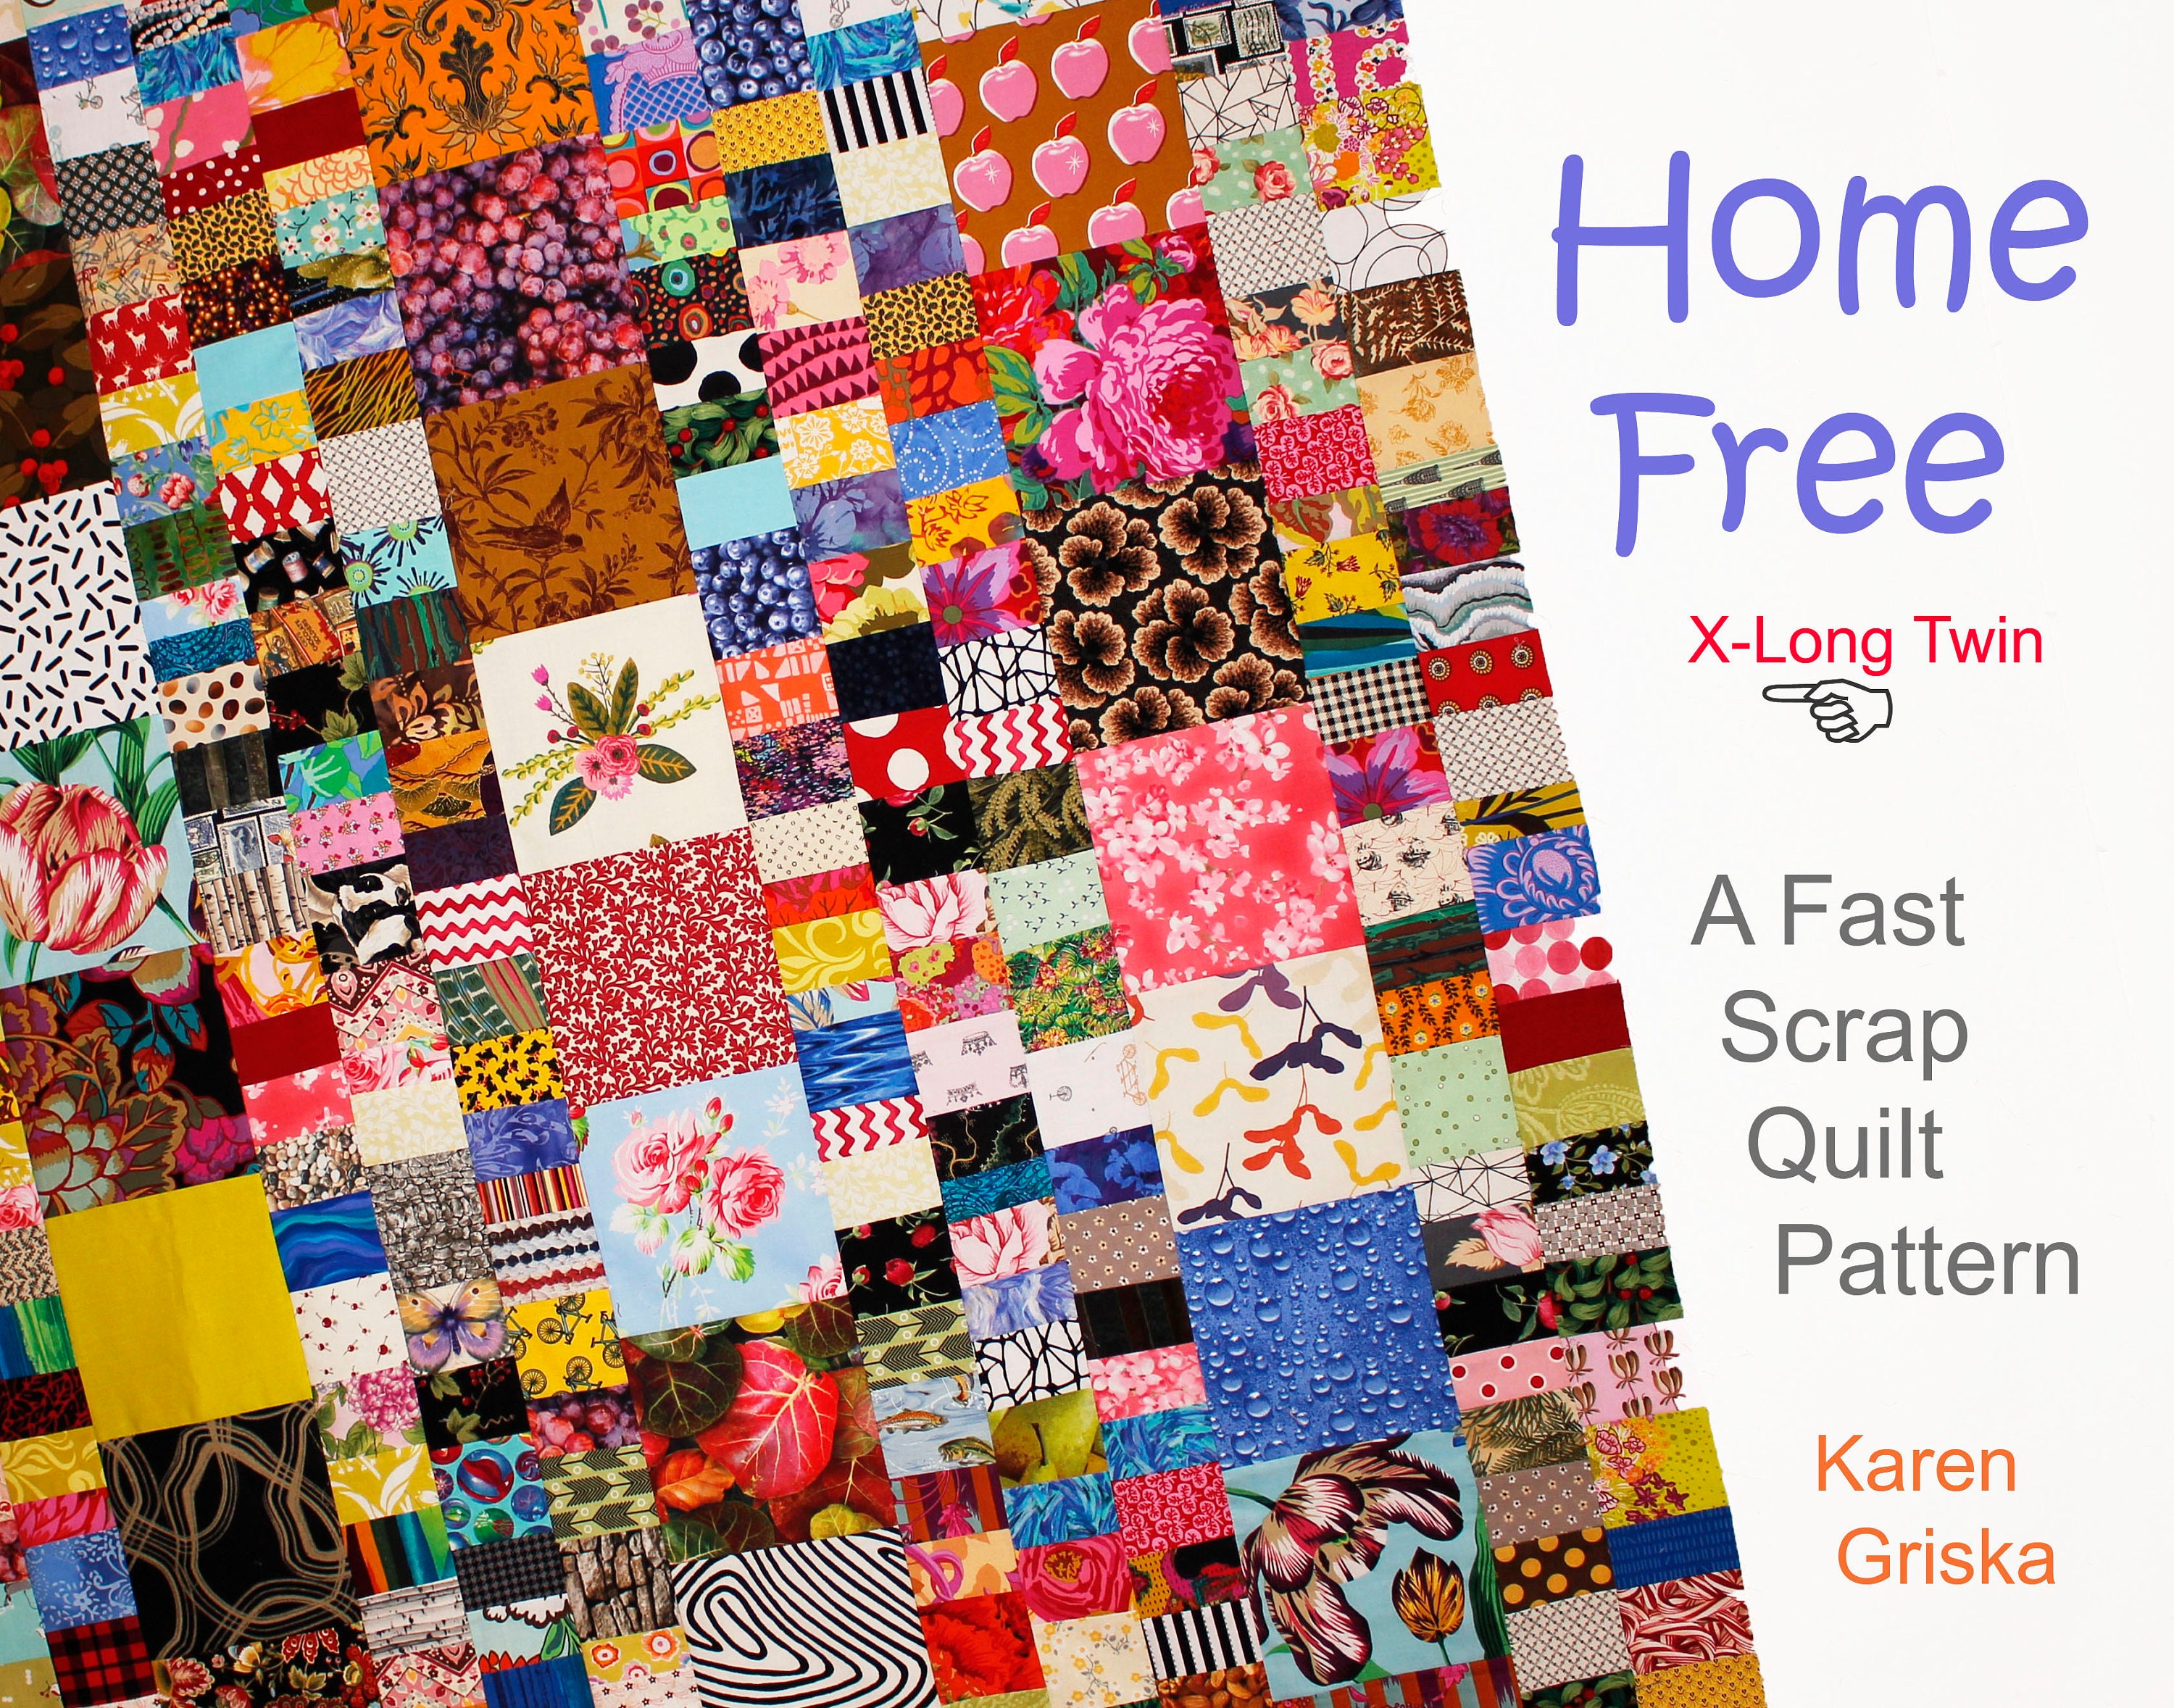 Home Free Scrap Quilt Pattern Extra Long Twin Quilt Pattern picture